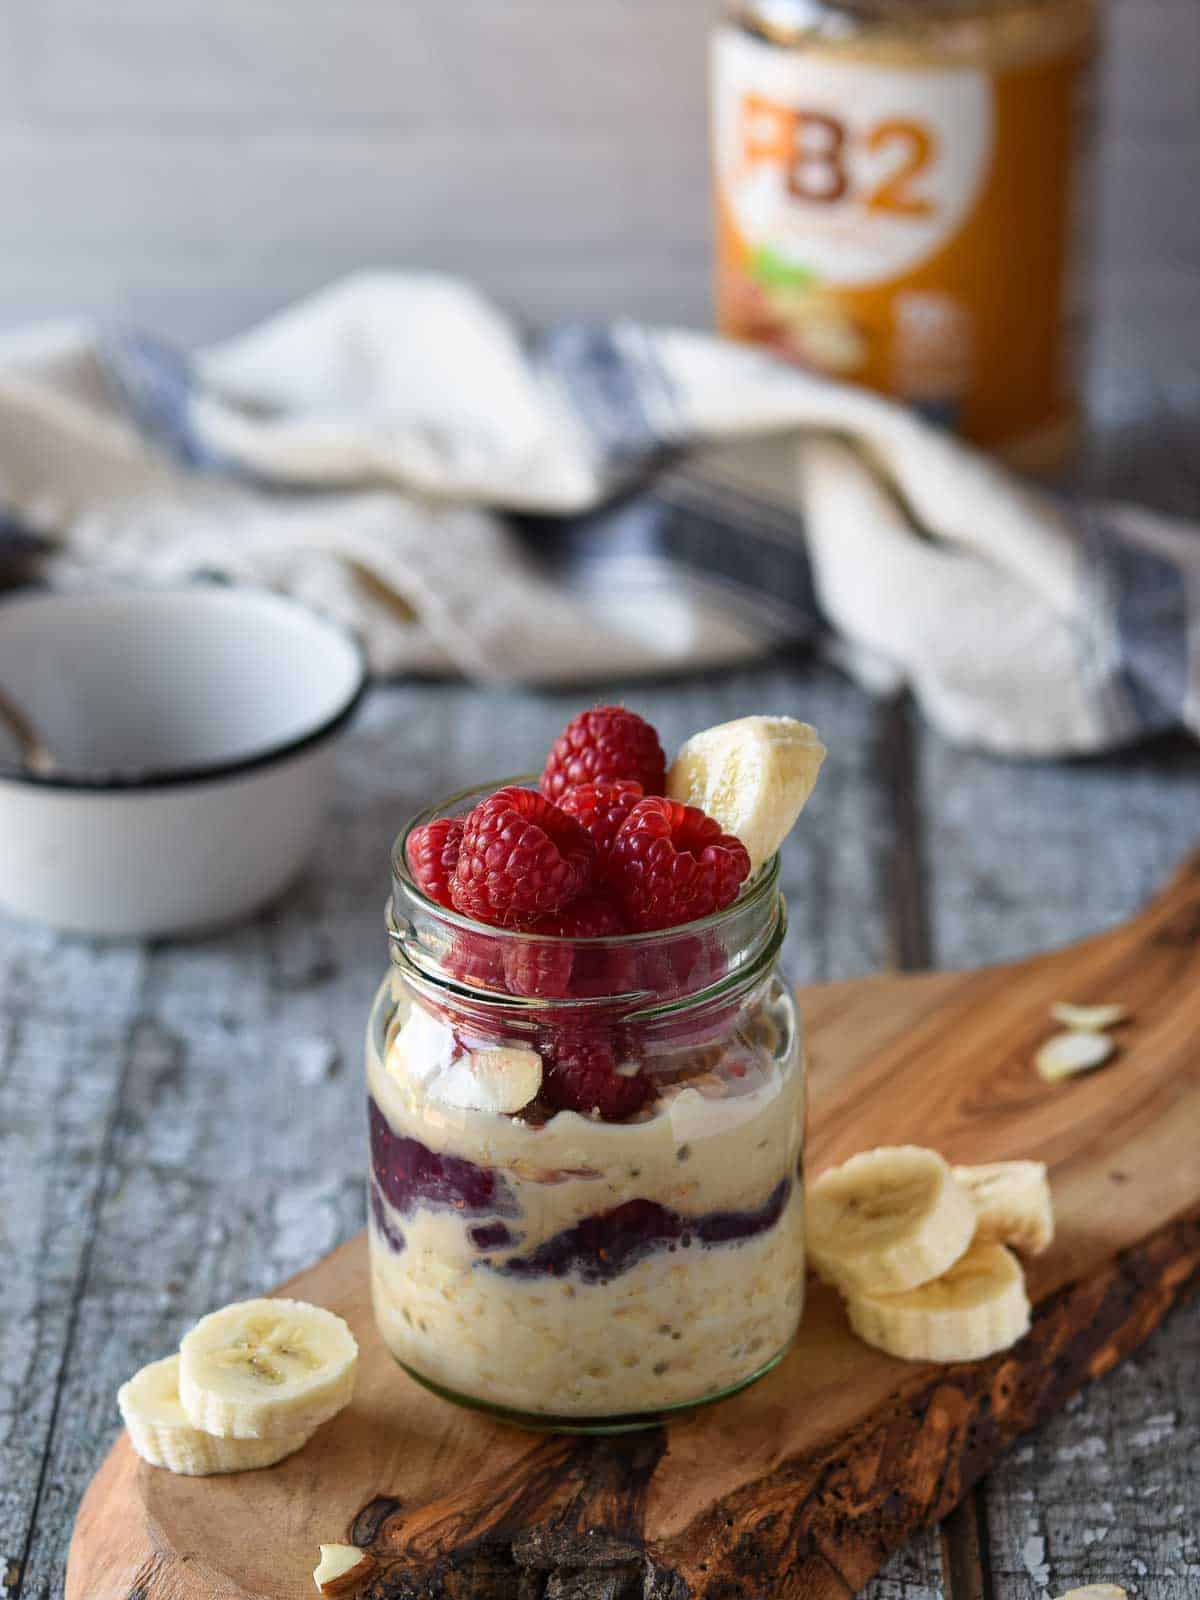 Peanut butter overnight oats in a jar with raspberries and bananas.